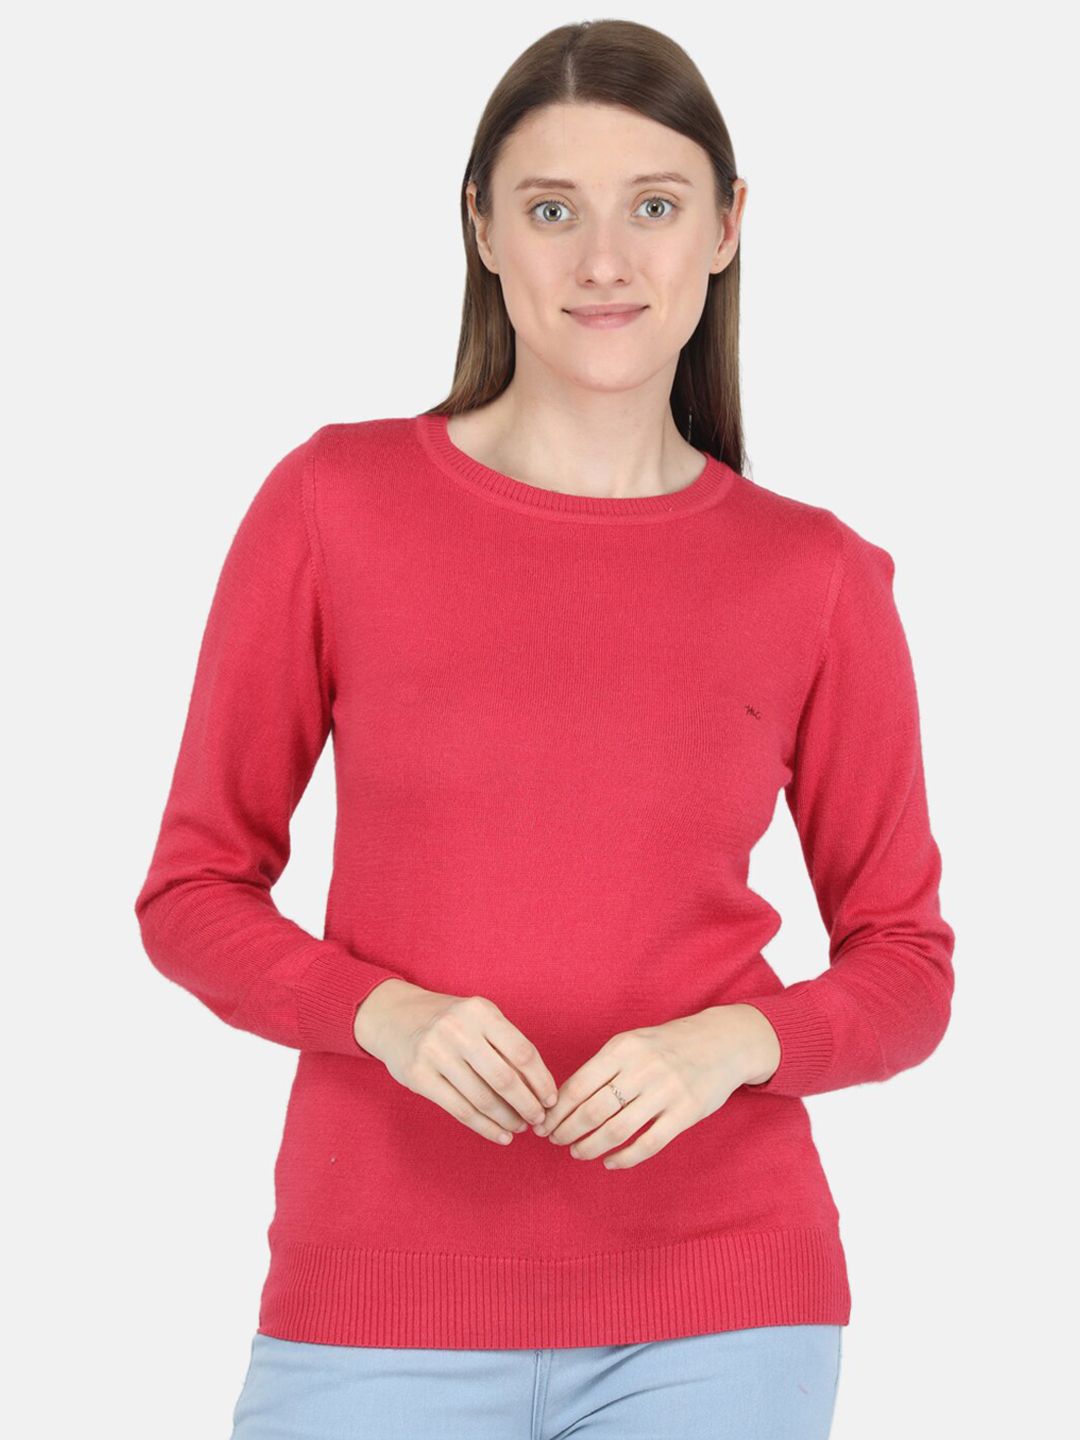 Monte Carlo Plus Size Solid Top Price in India